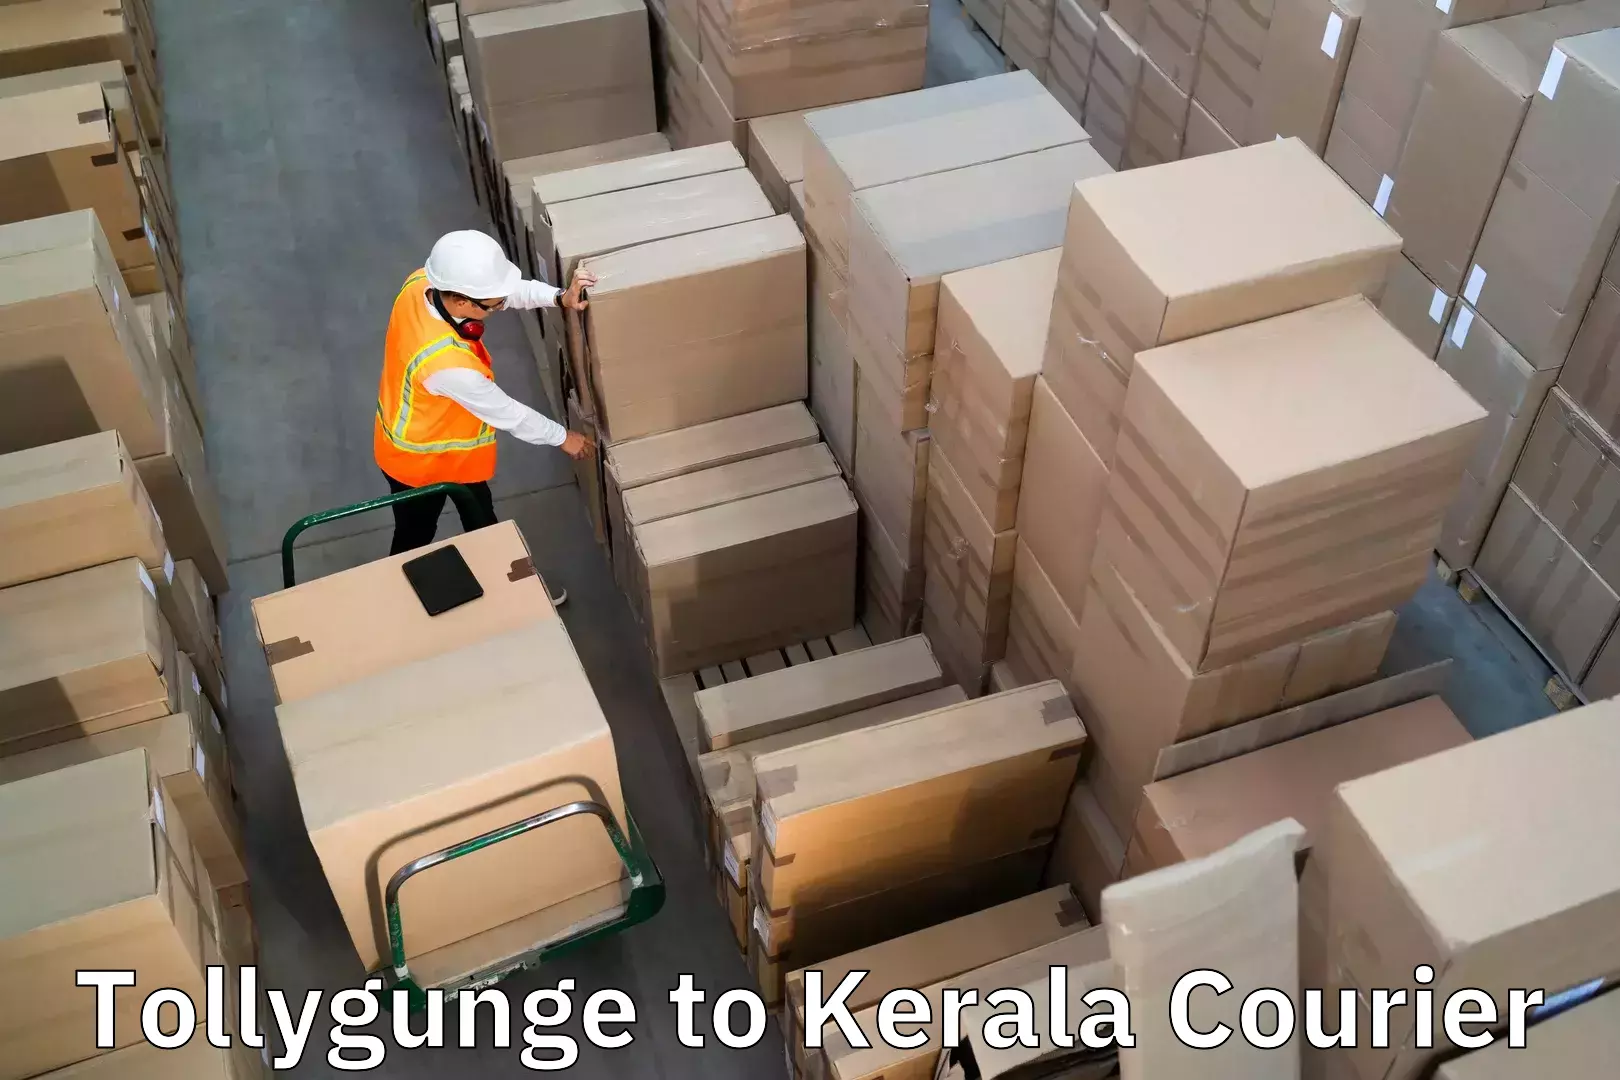 Luggage transport company Tollygunge to Palai